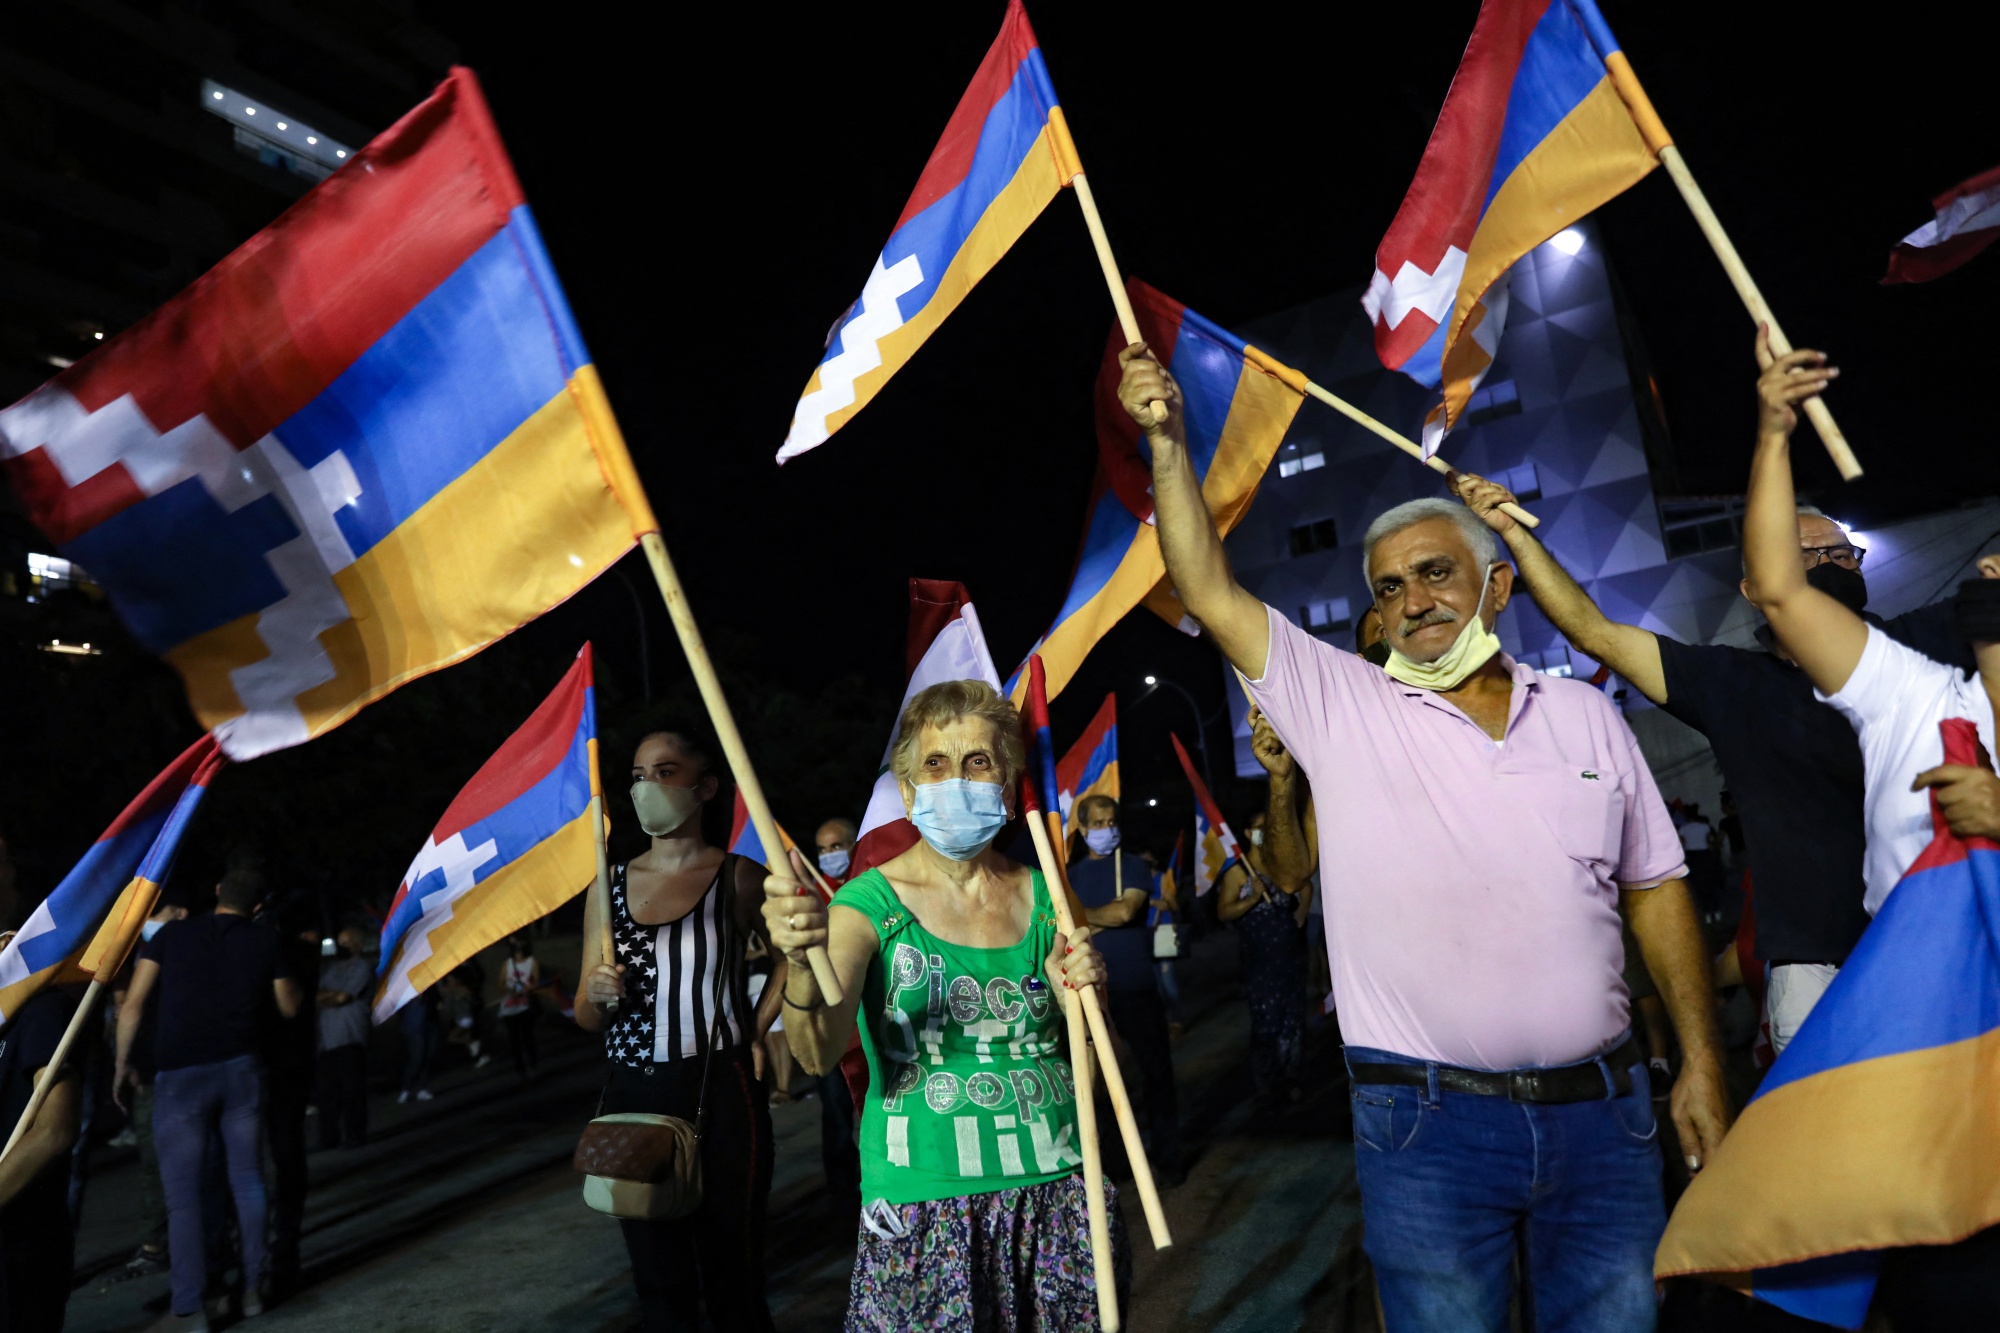 Lebanese of Armenian origin raise Armenian, national and Nagorno-Karabakh flags as they take part in a rally in the Beirut suburb of Burj Hammoud on 9 October 2020 (AFP)